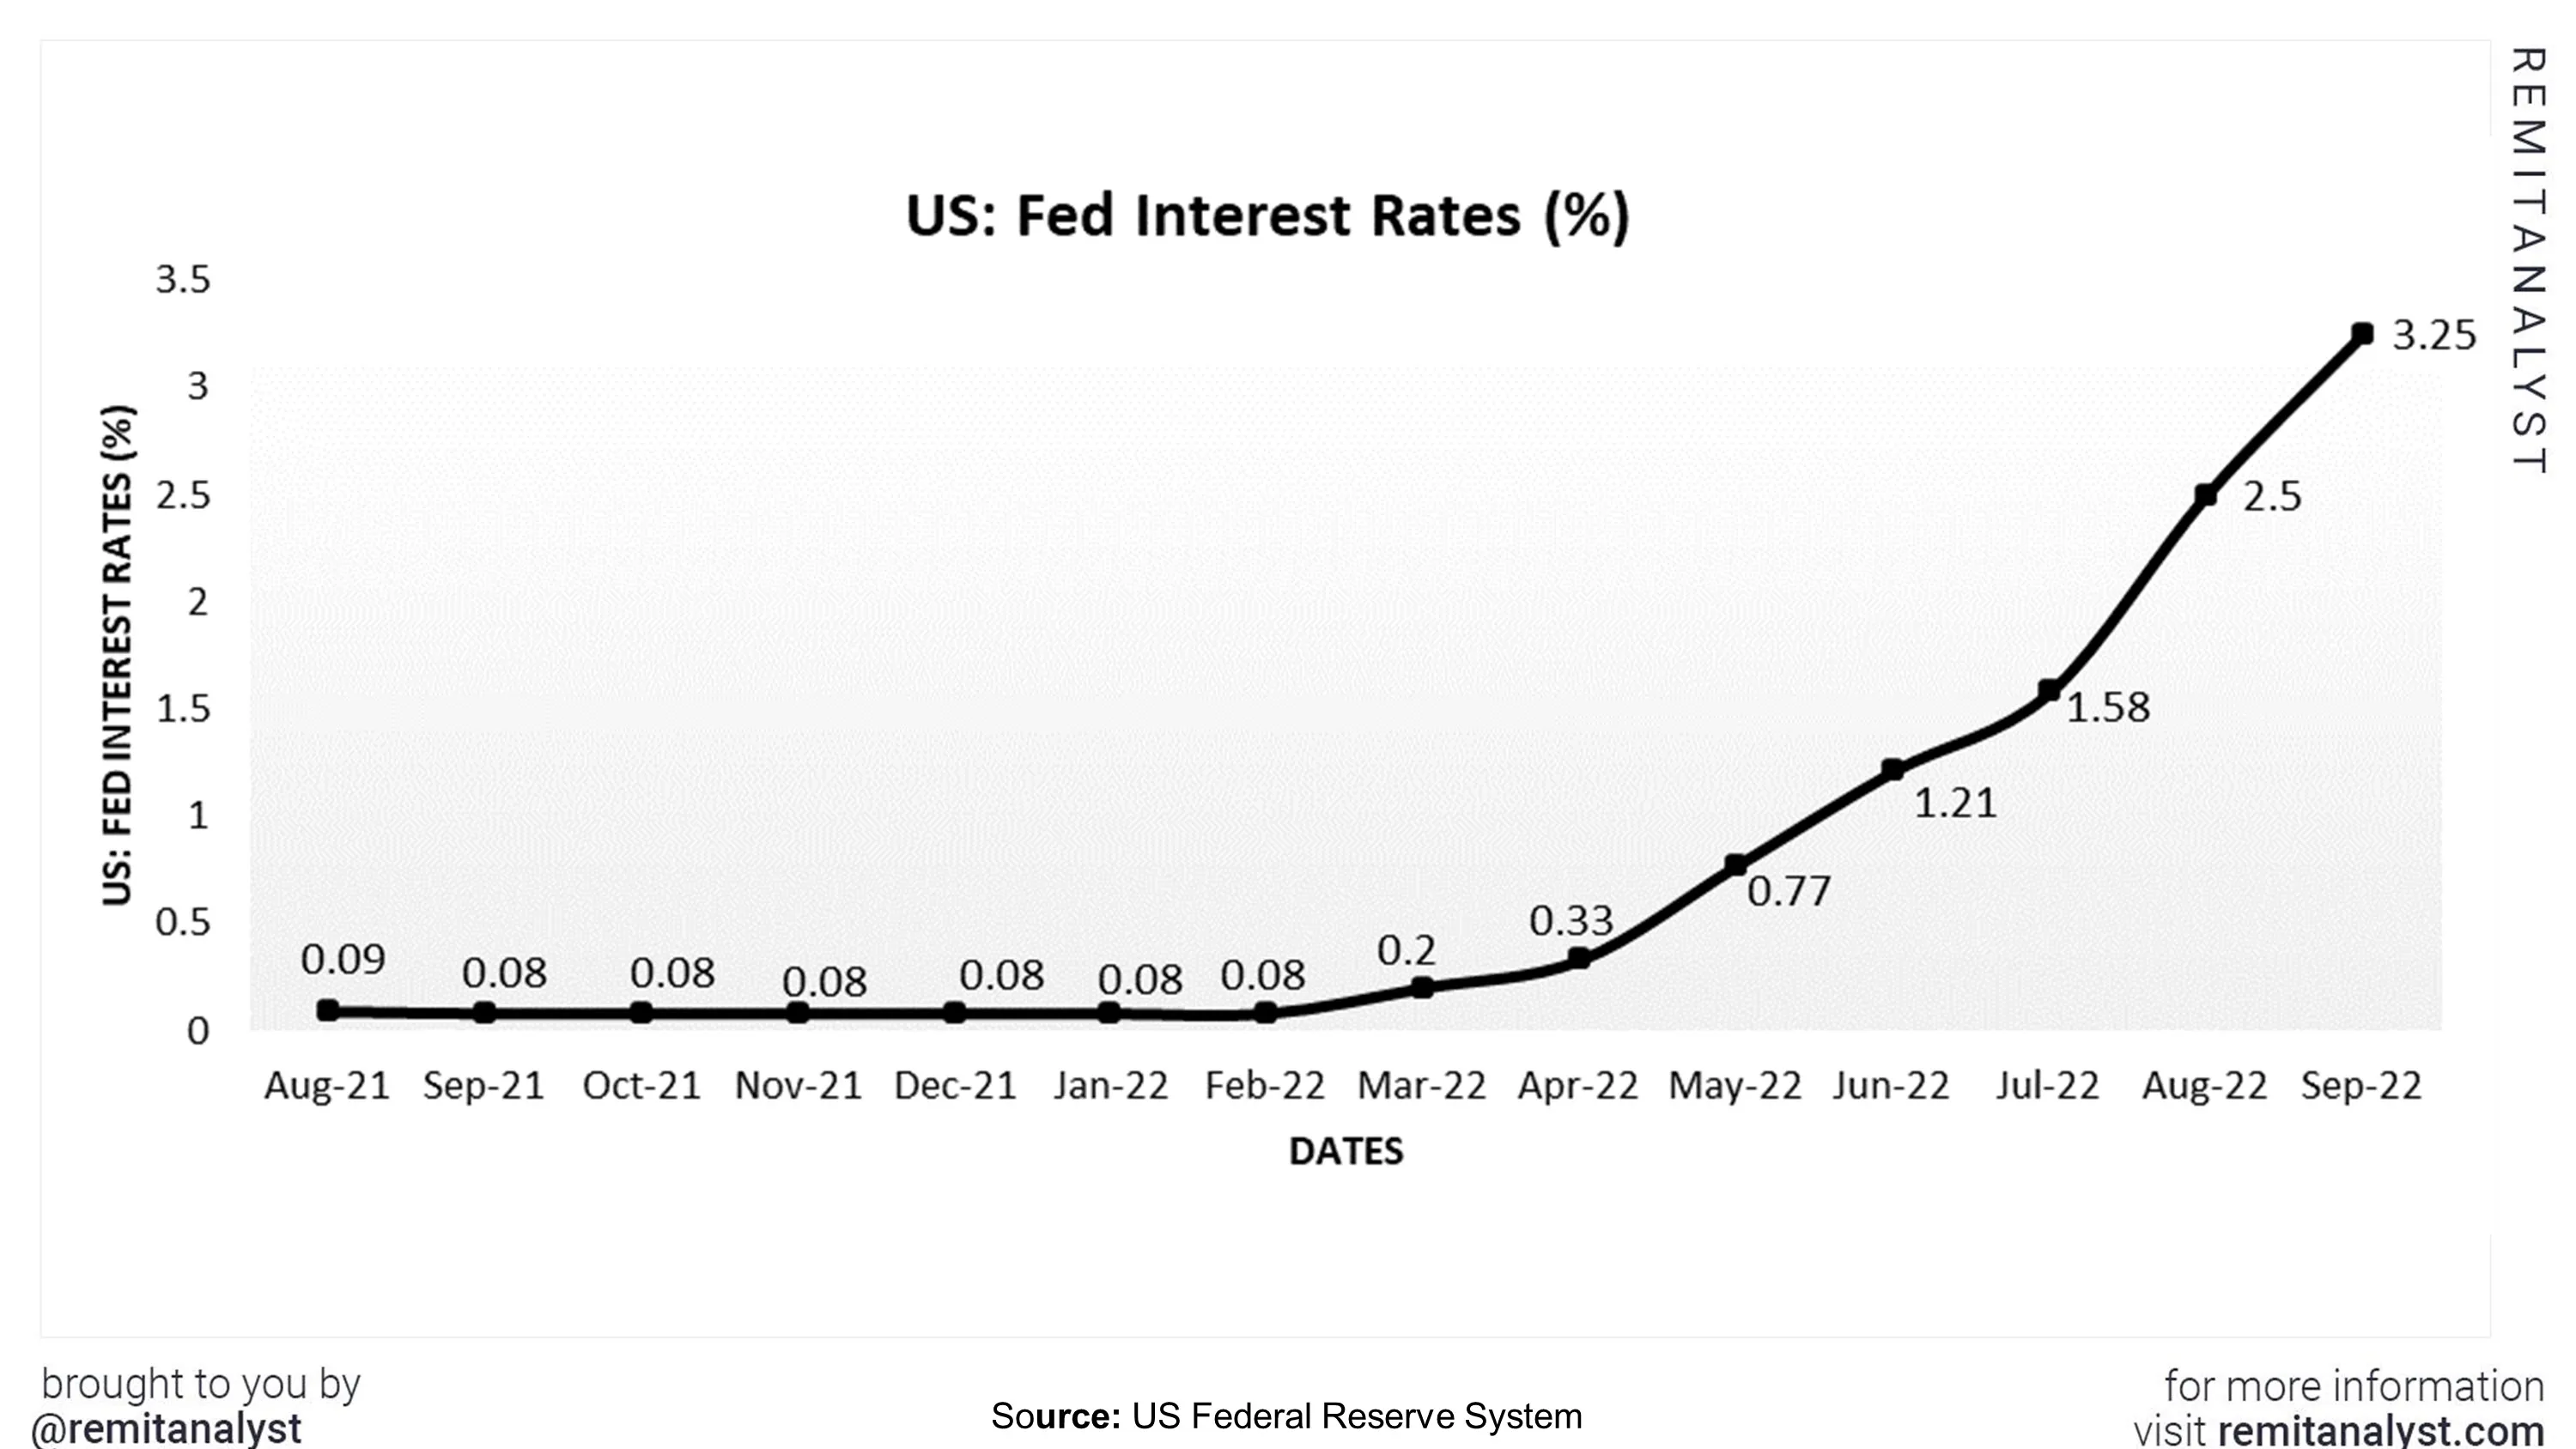 interest-rates-in-us-from-aug-2021-to-sep-2022